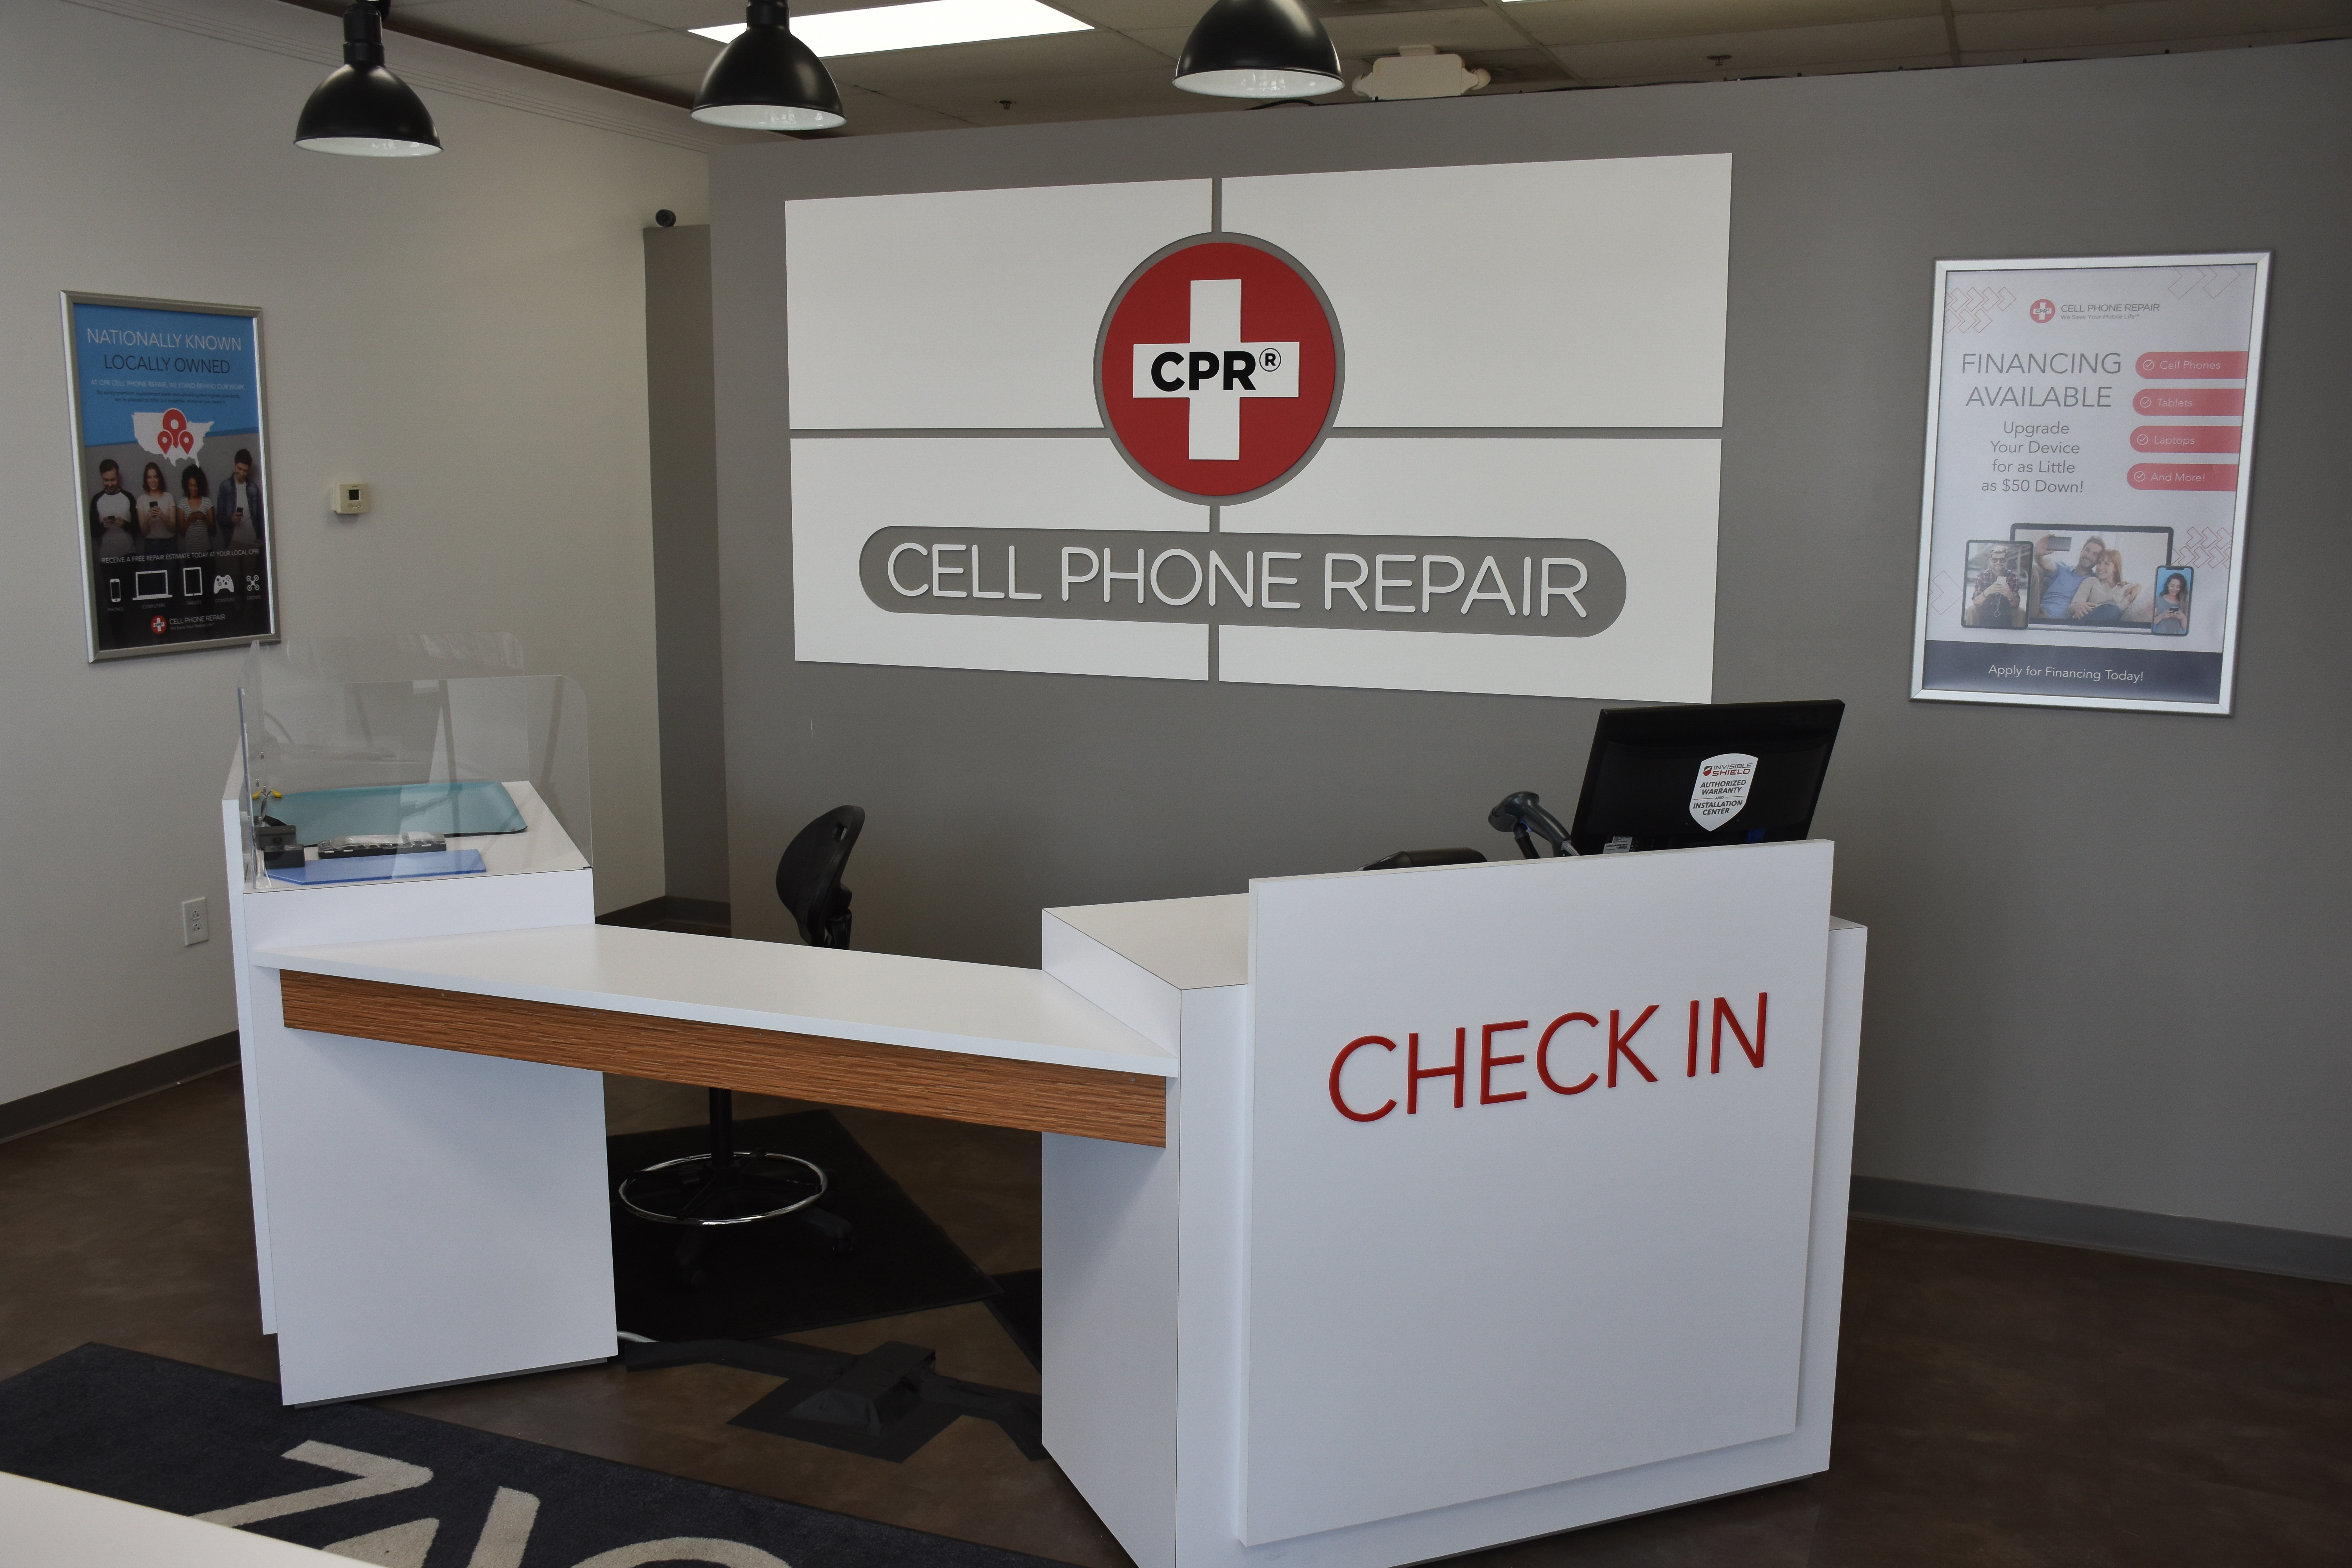 CPR Cell Phone Repair, Monday, April 12, 2021, Press release picture